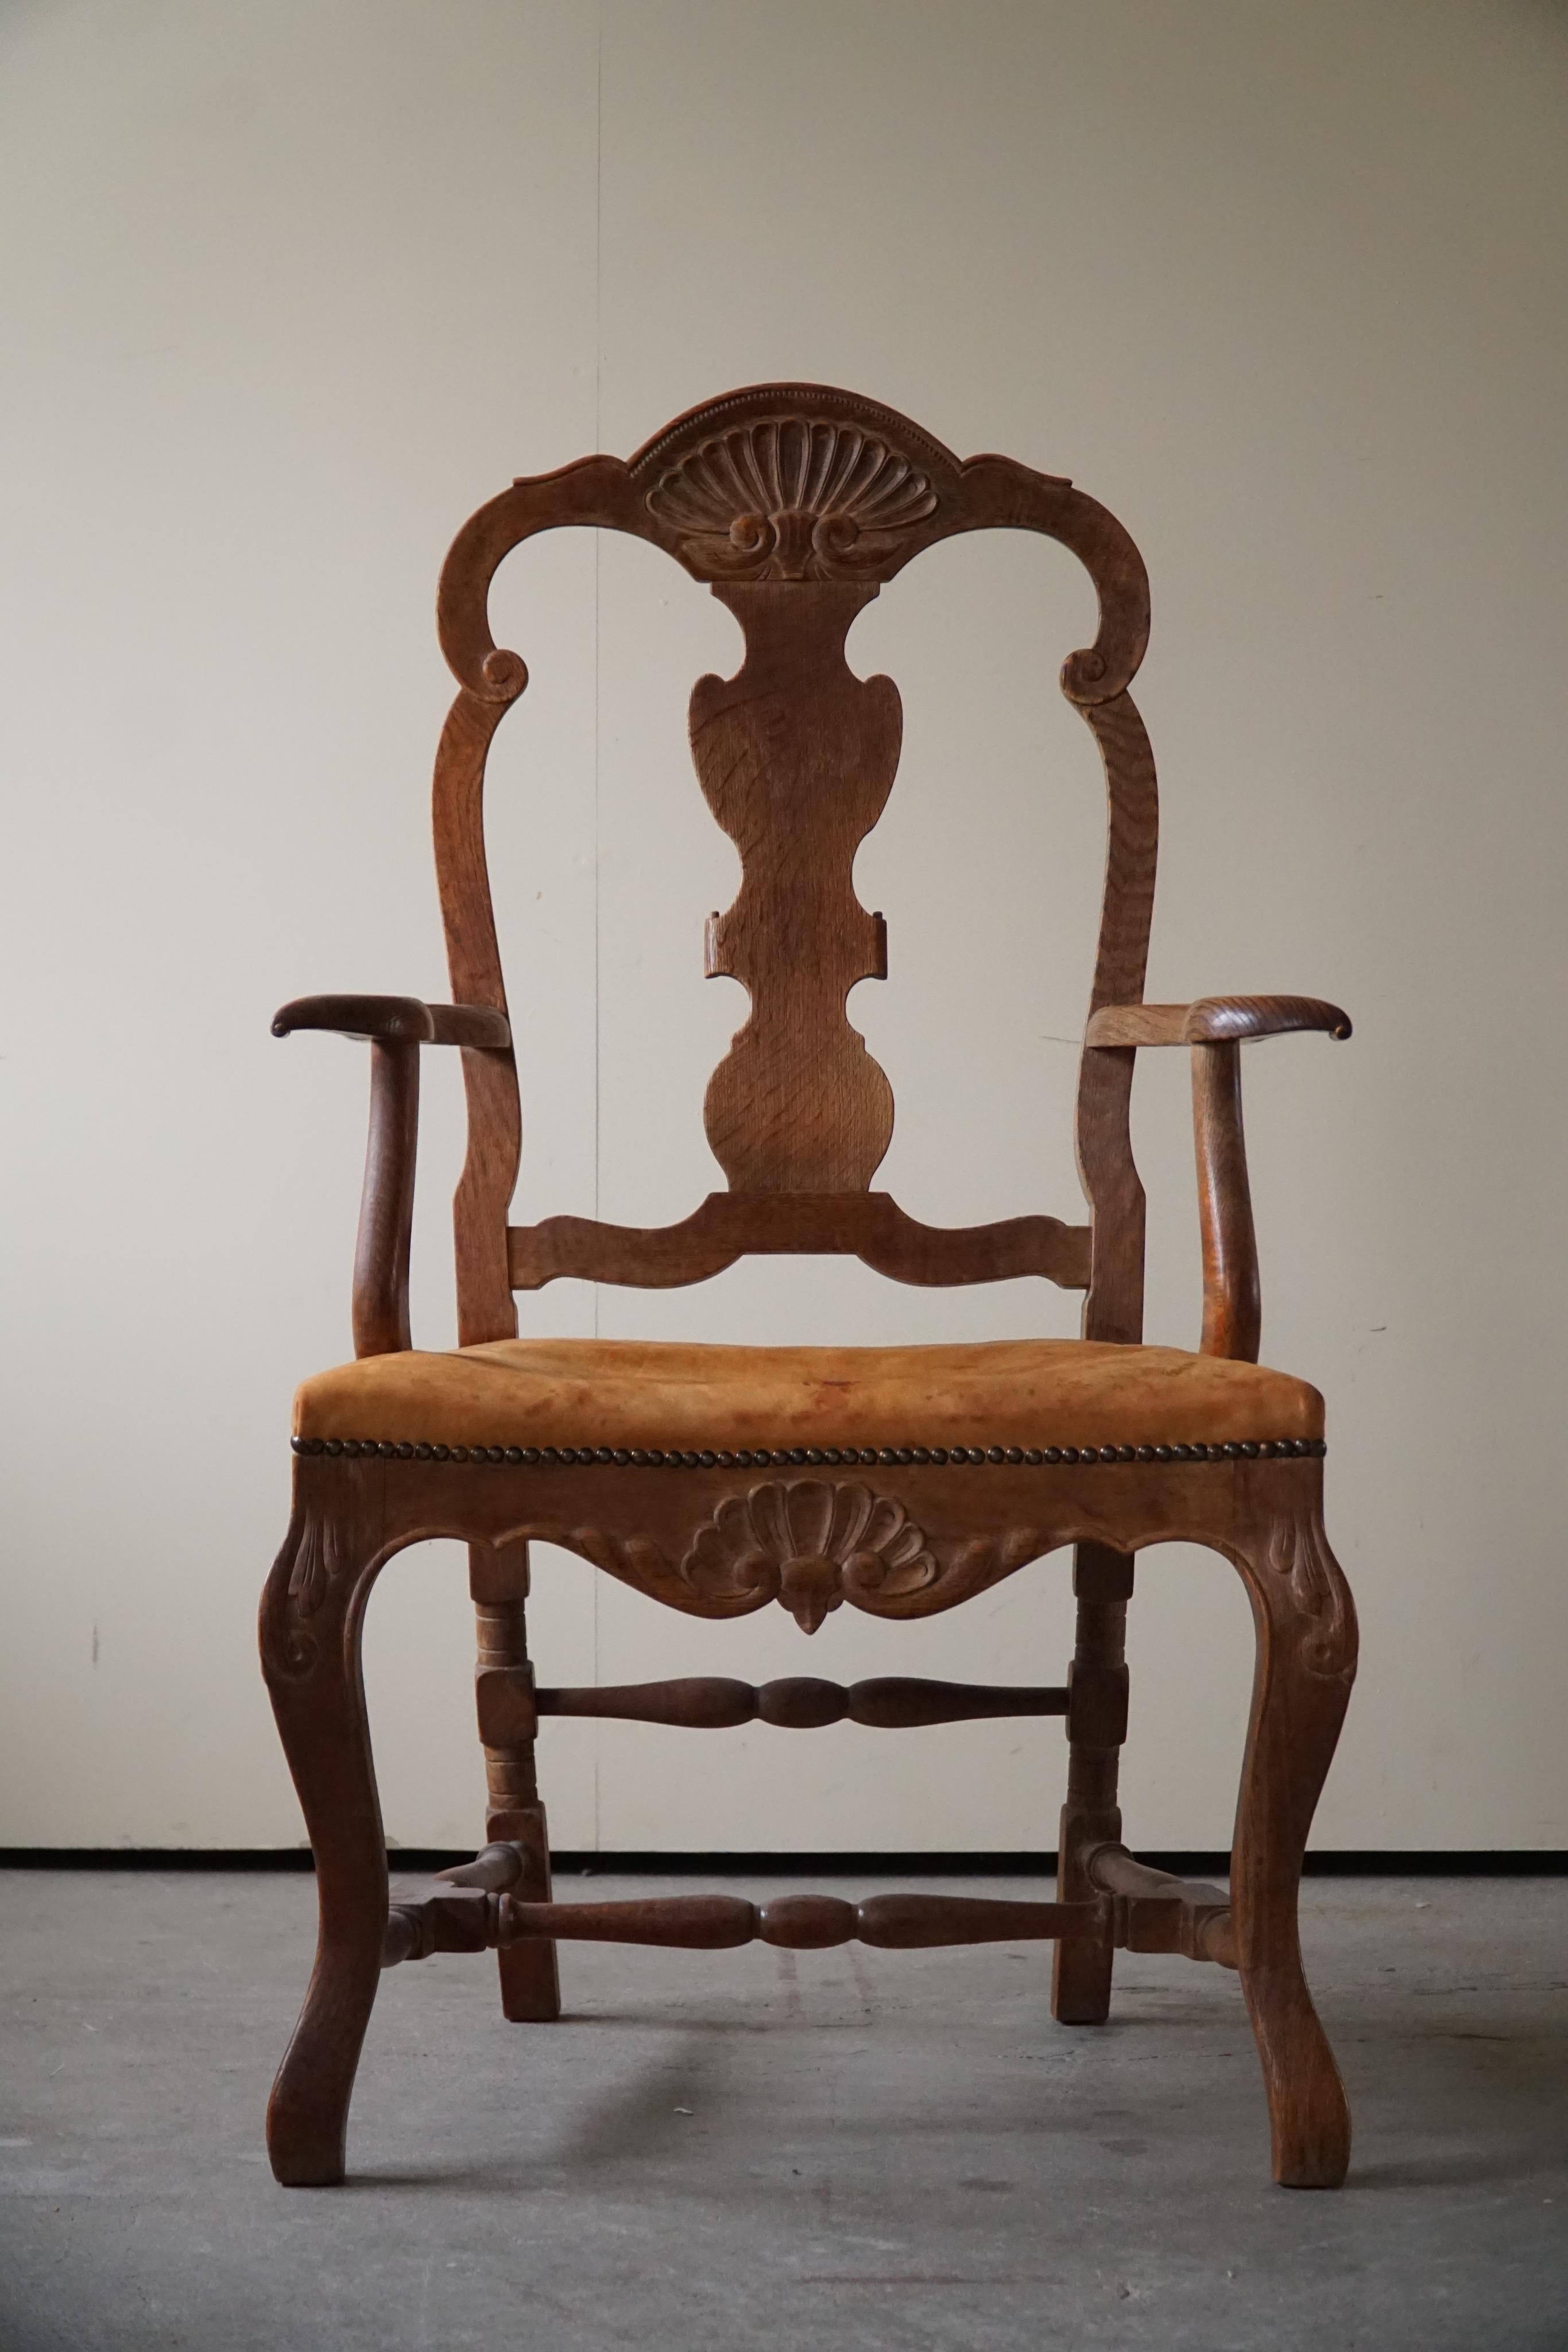  Sculptural Vintage Armchair in Oak and Leather, Danish Modern, 1940s For Sale 5